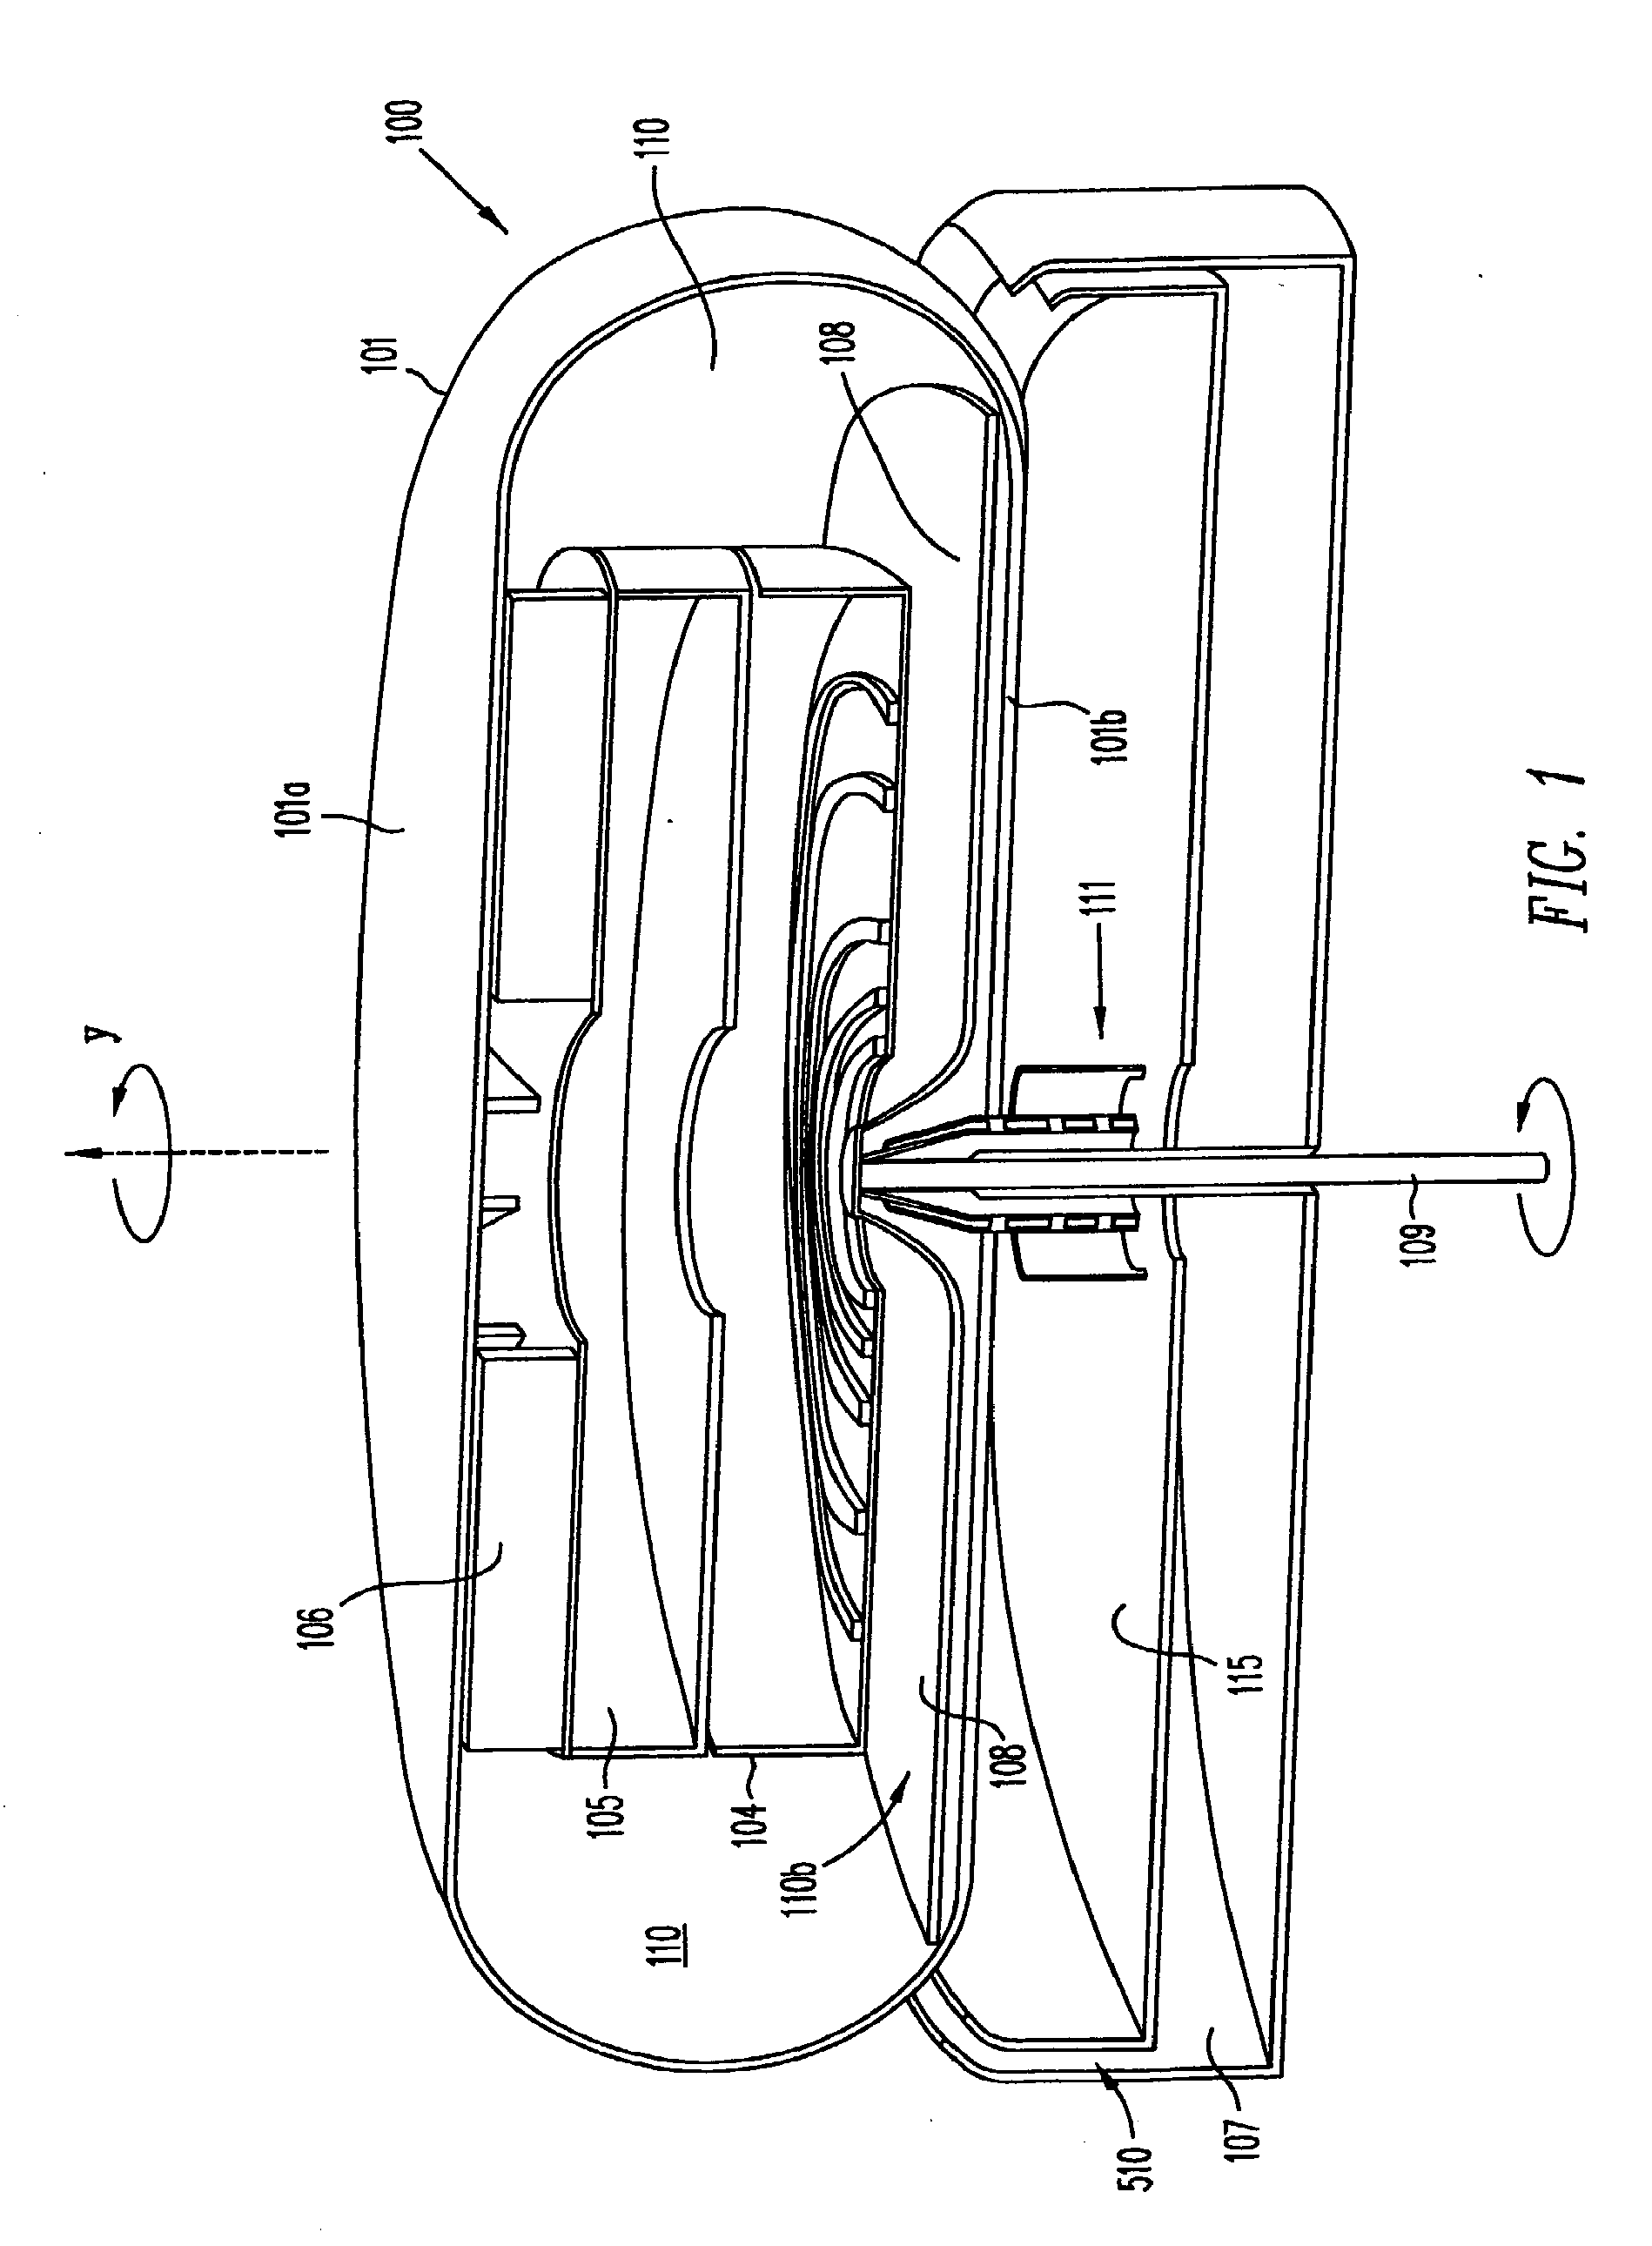 Method and system for generation of power using stirling engine principles